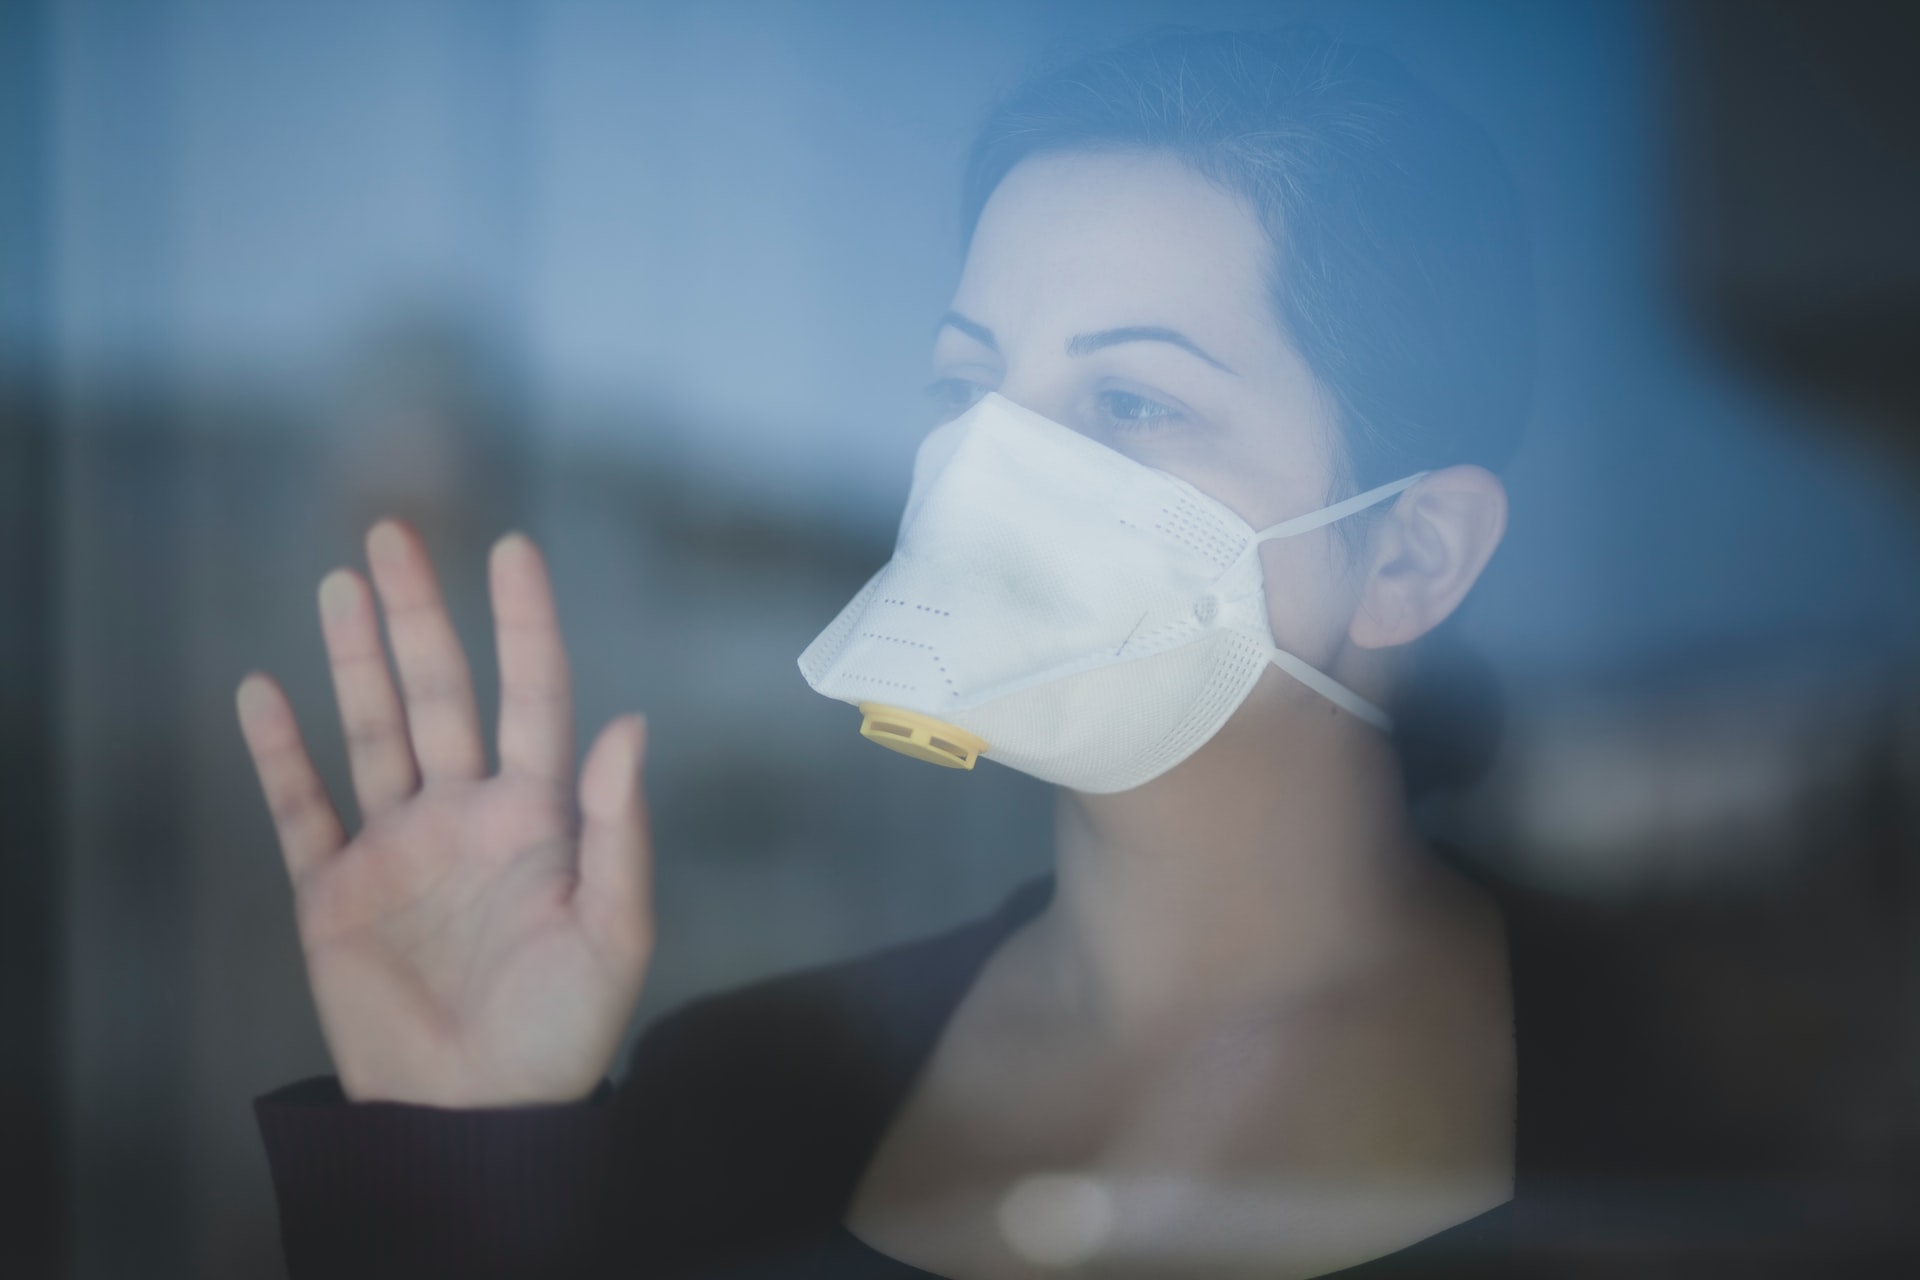 Woman wearing protective filter face mask standing behind pane of glass looking outside